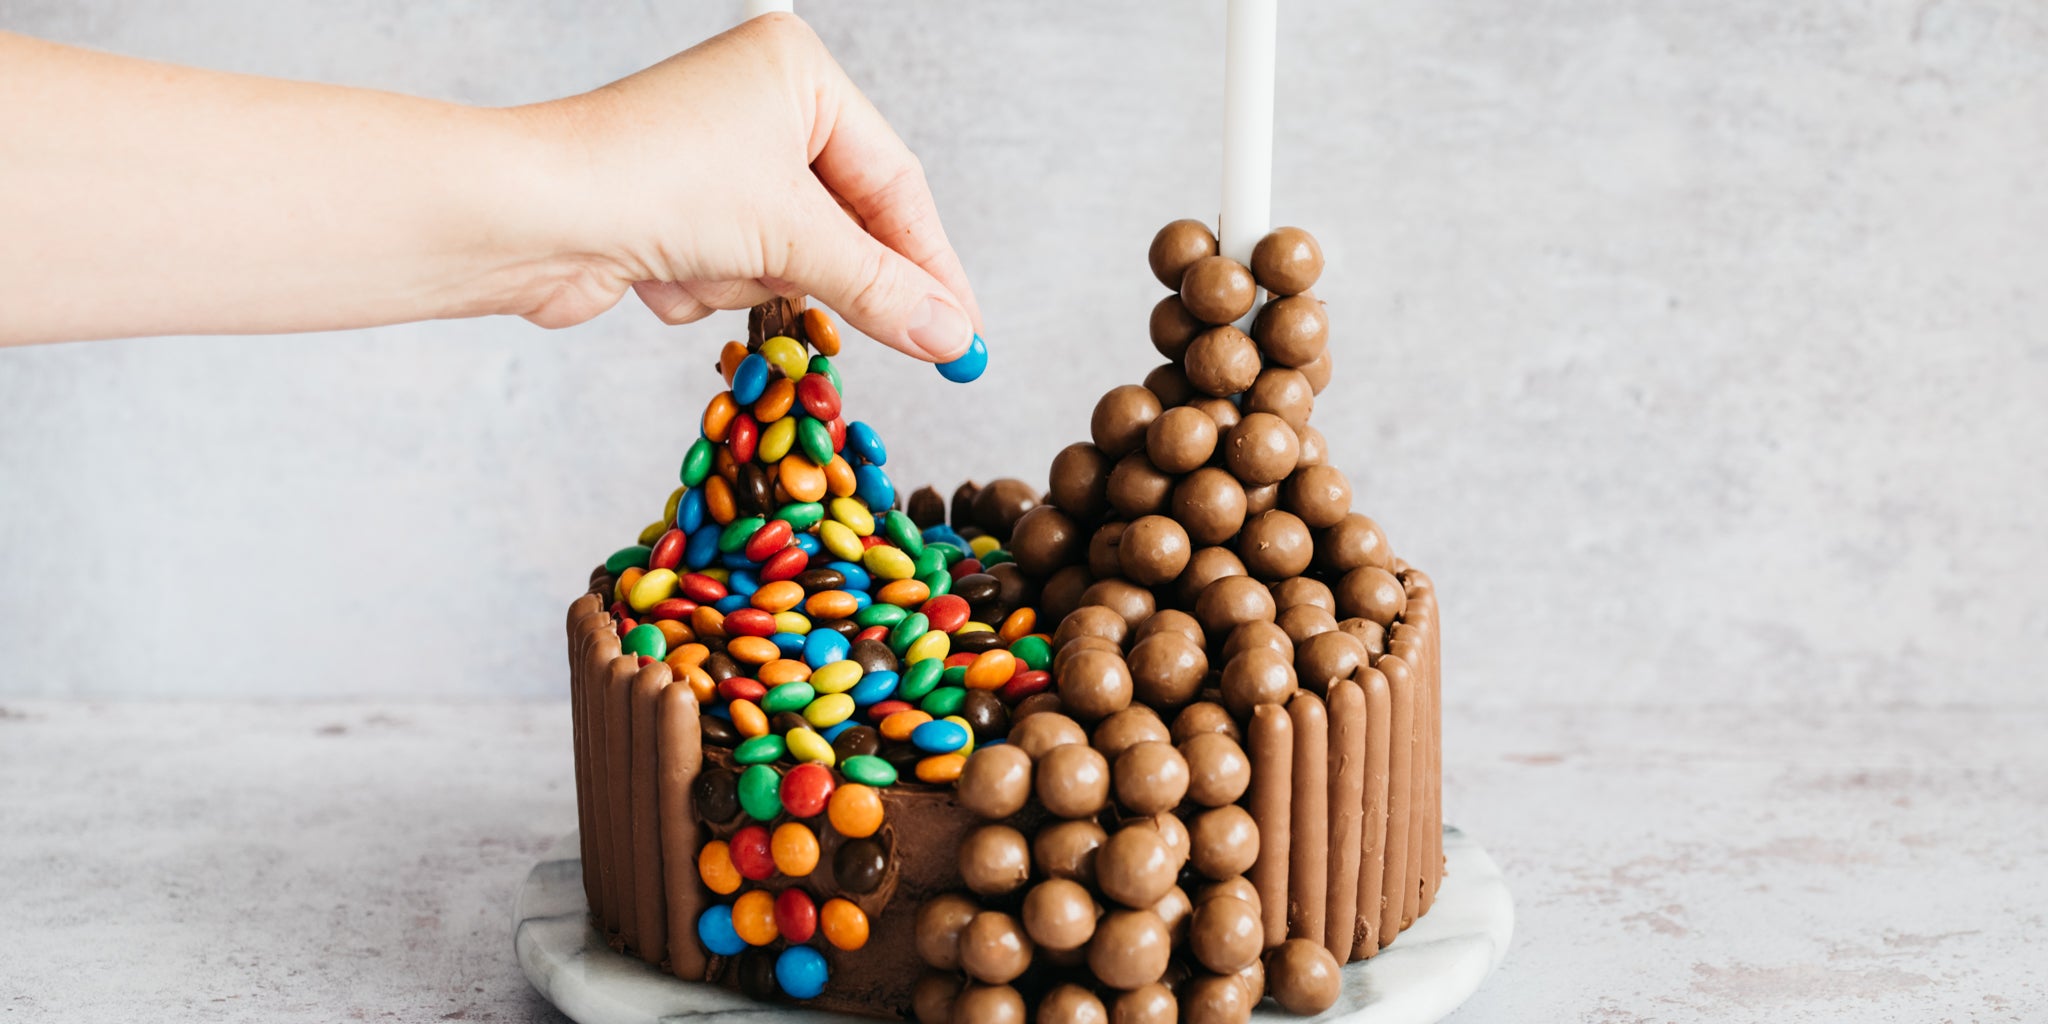 10 Awesome Birthday Cake Designs - Little Lake County